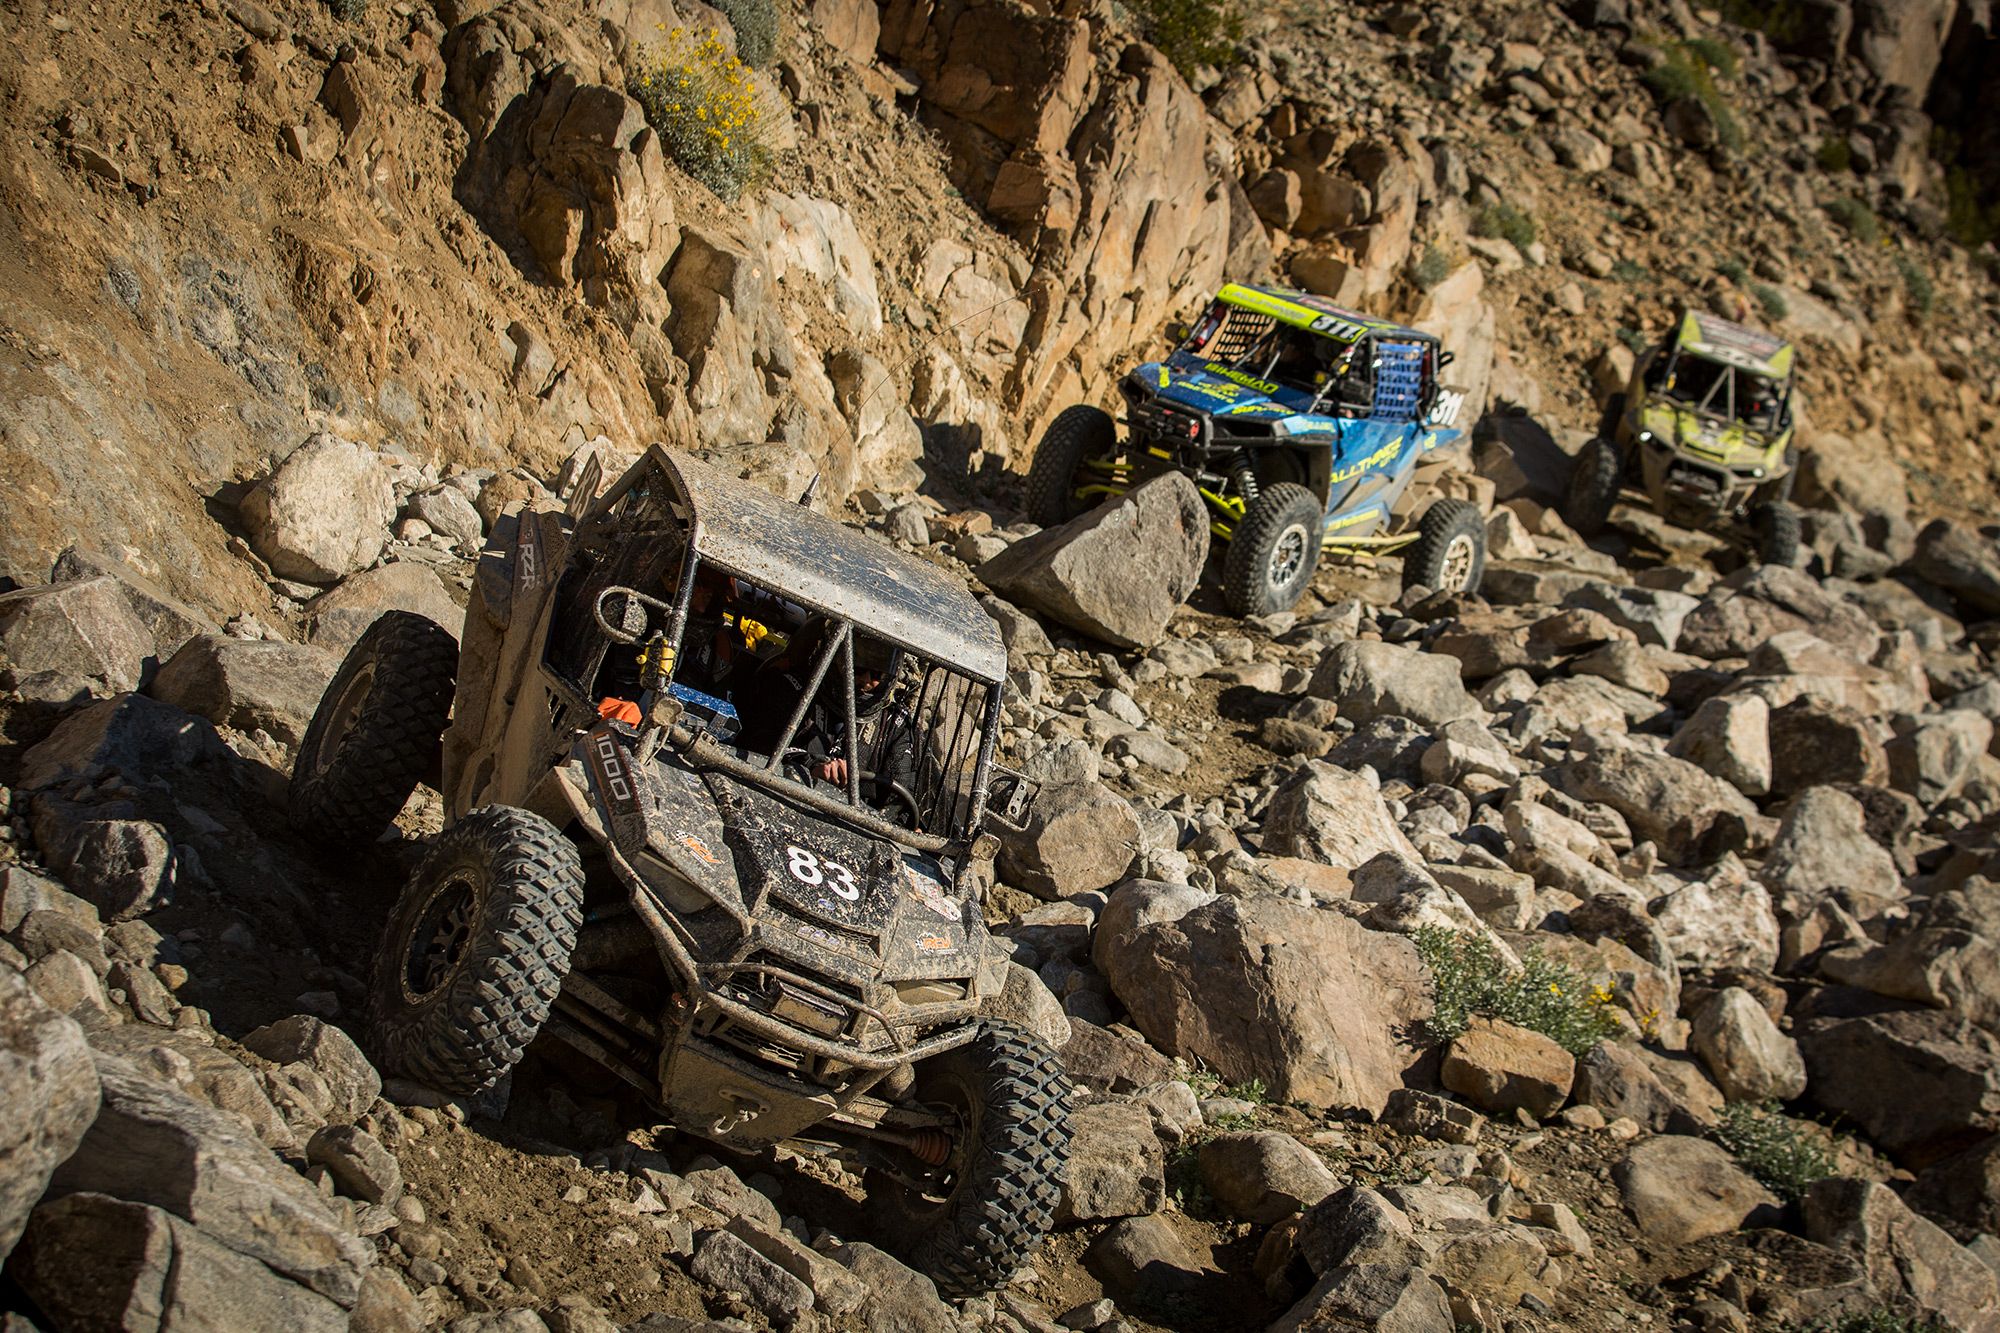 Vehicles crawling on King of the Hammers 2019